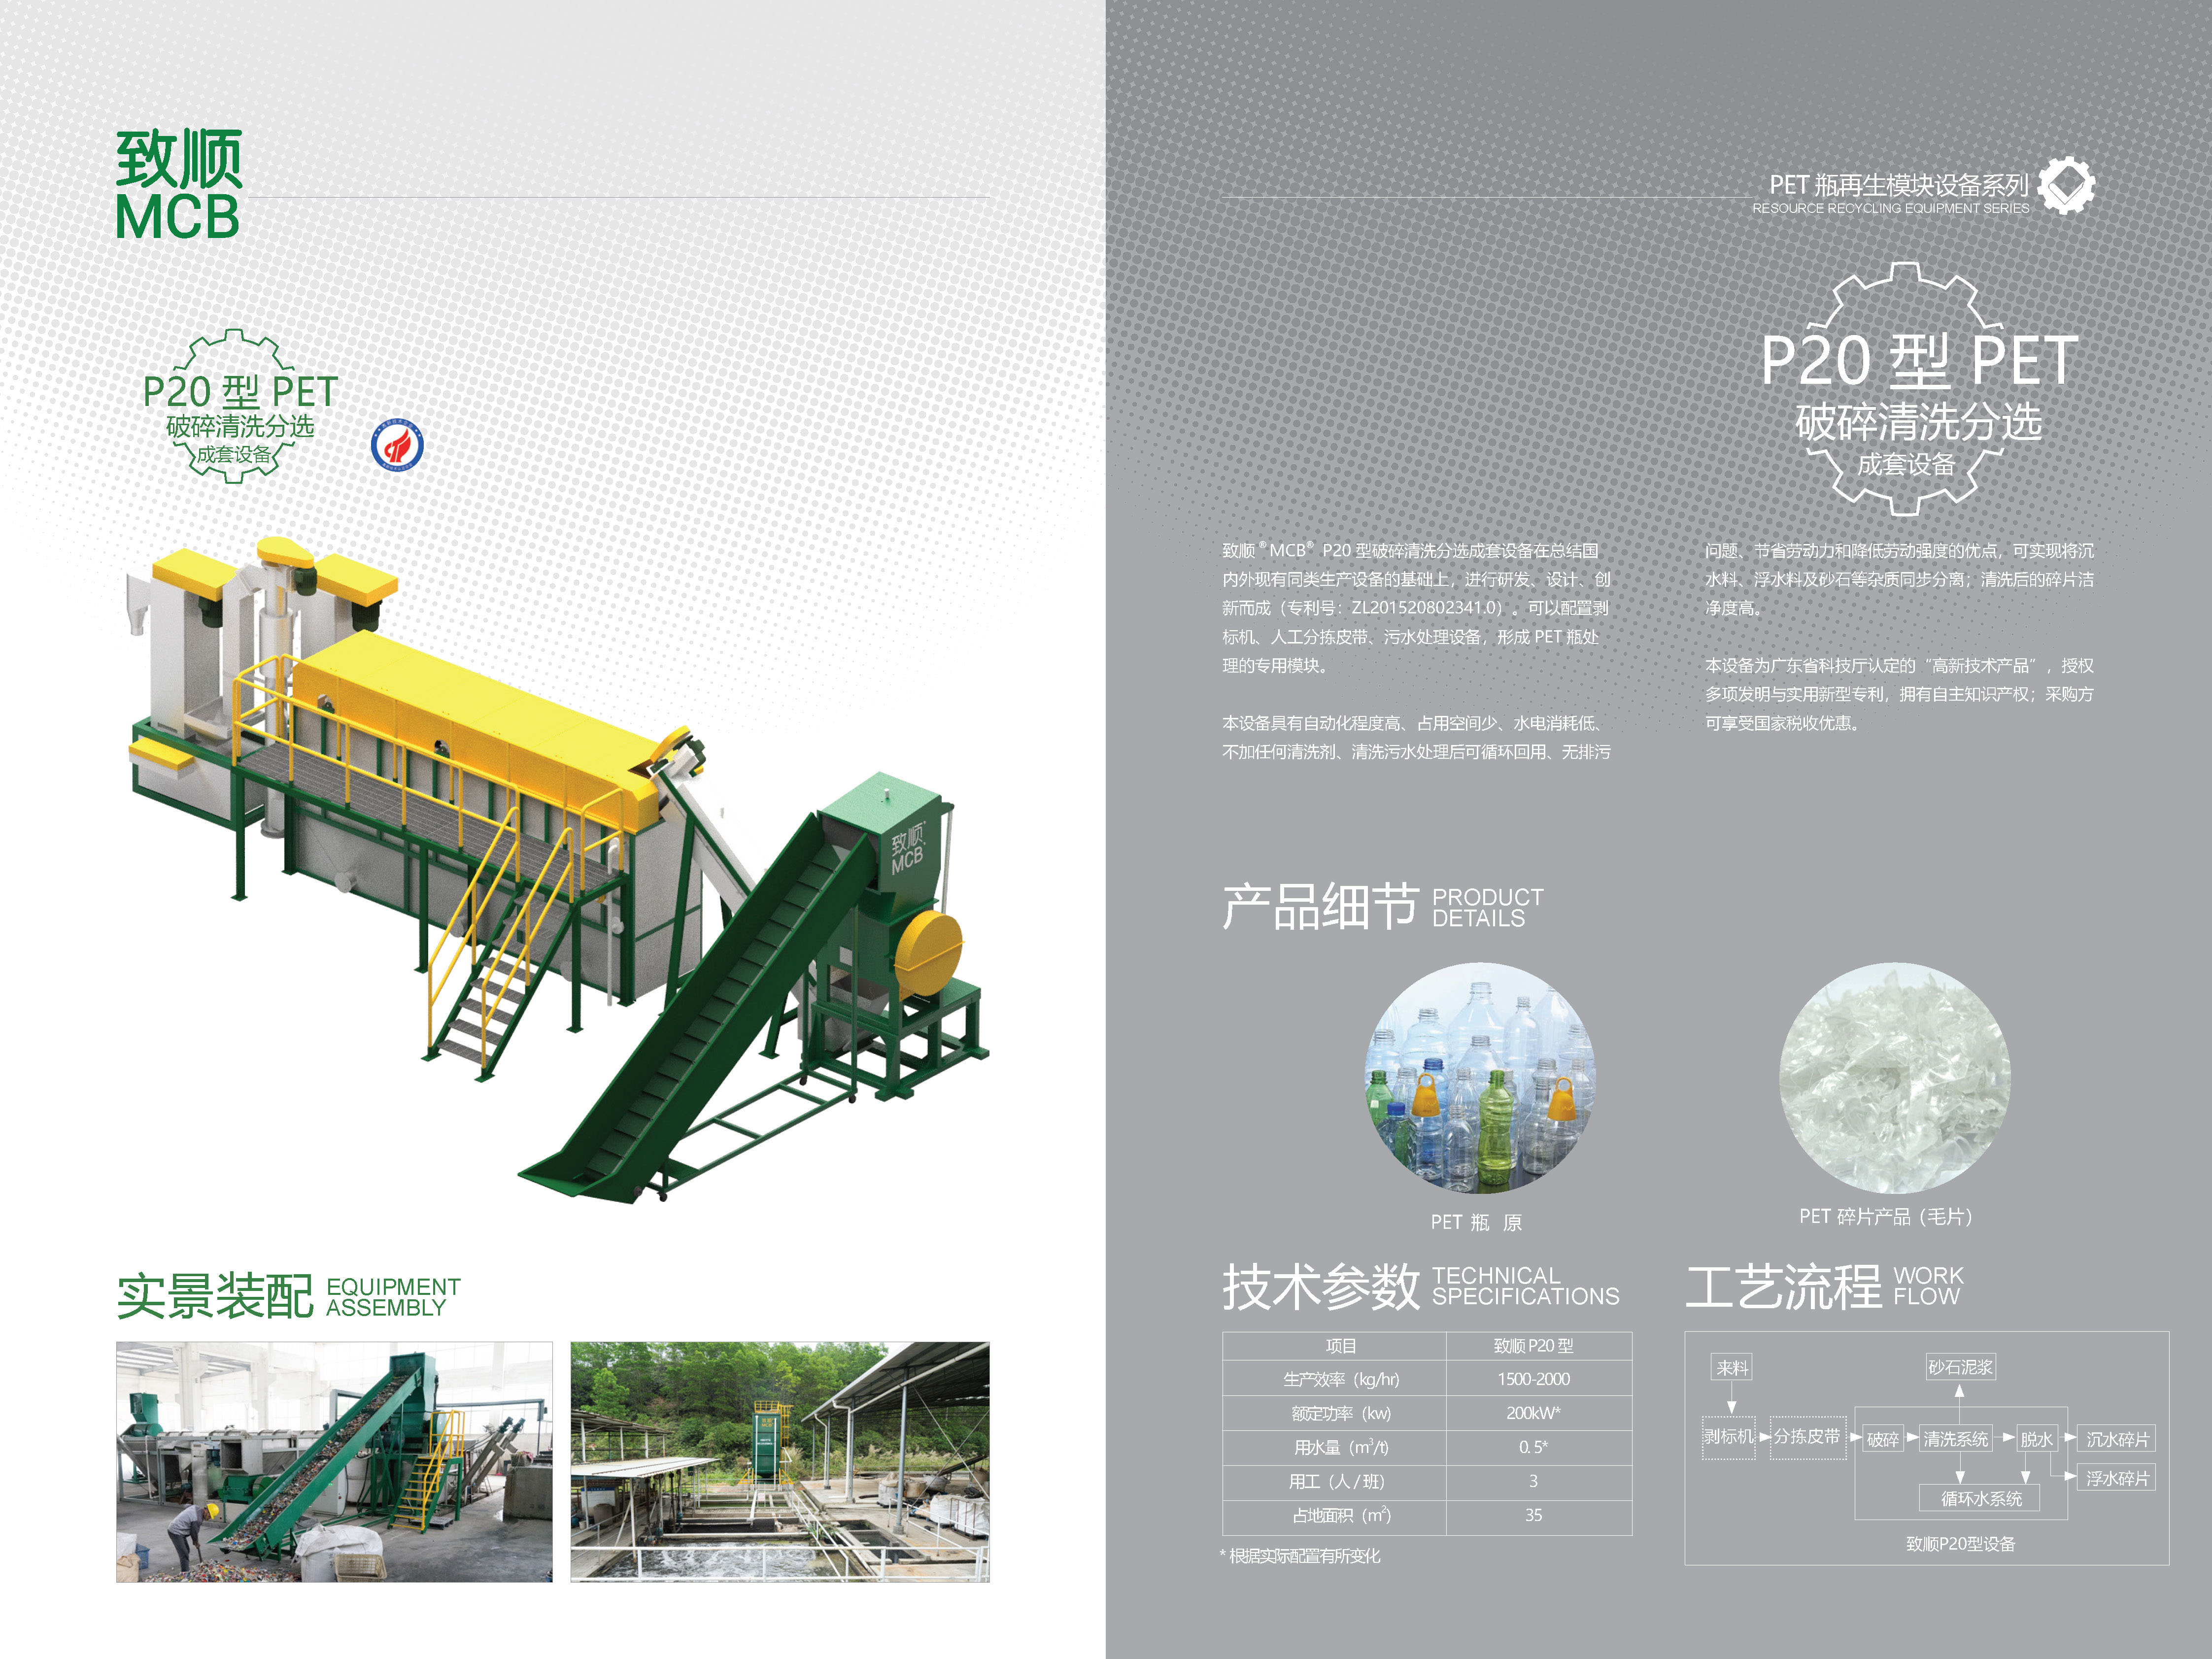 PET crushing and cleaning complete equipment